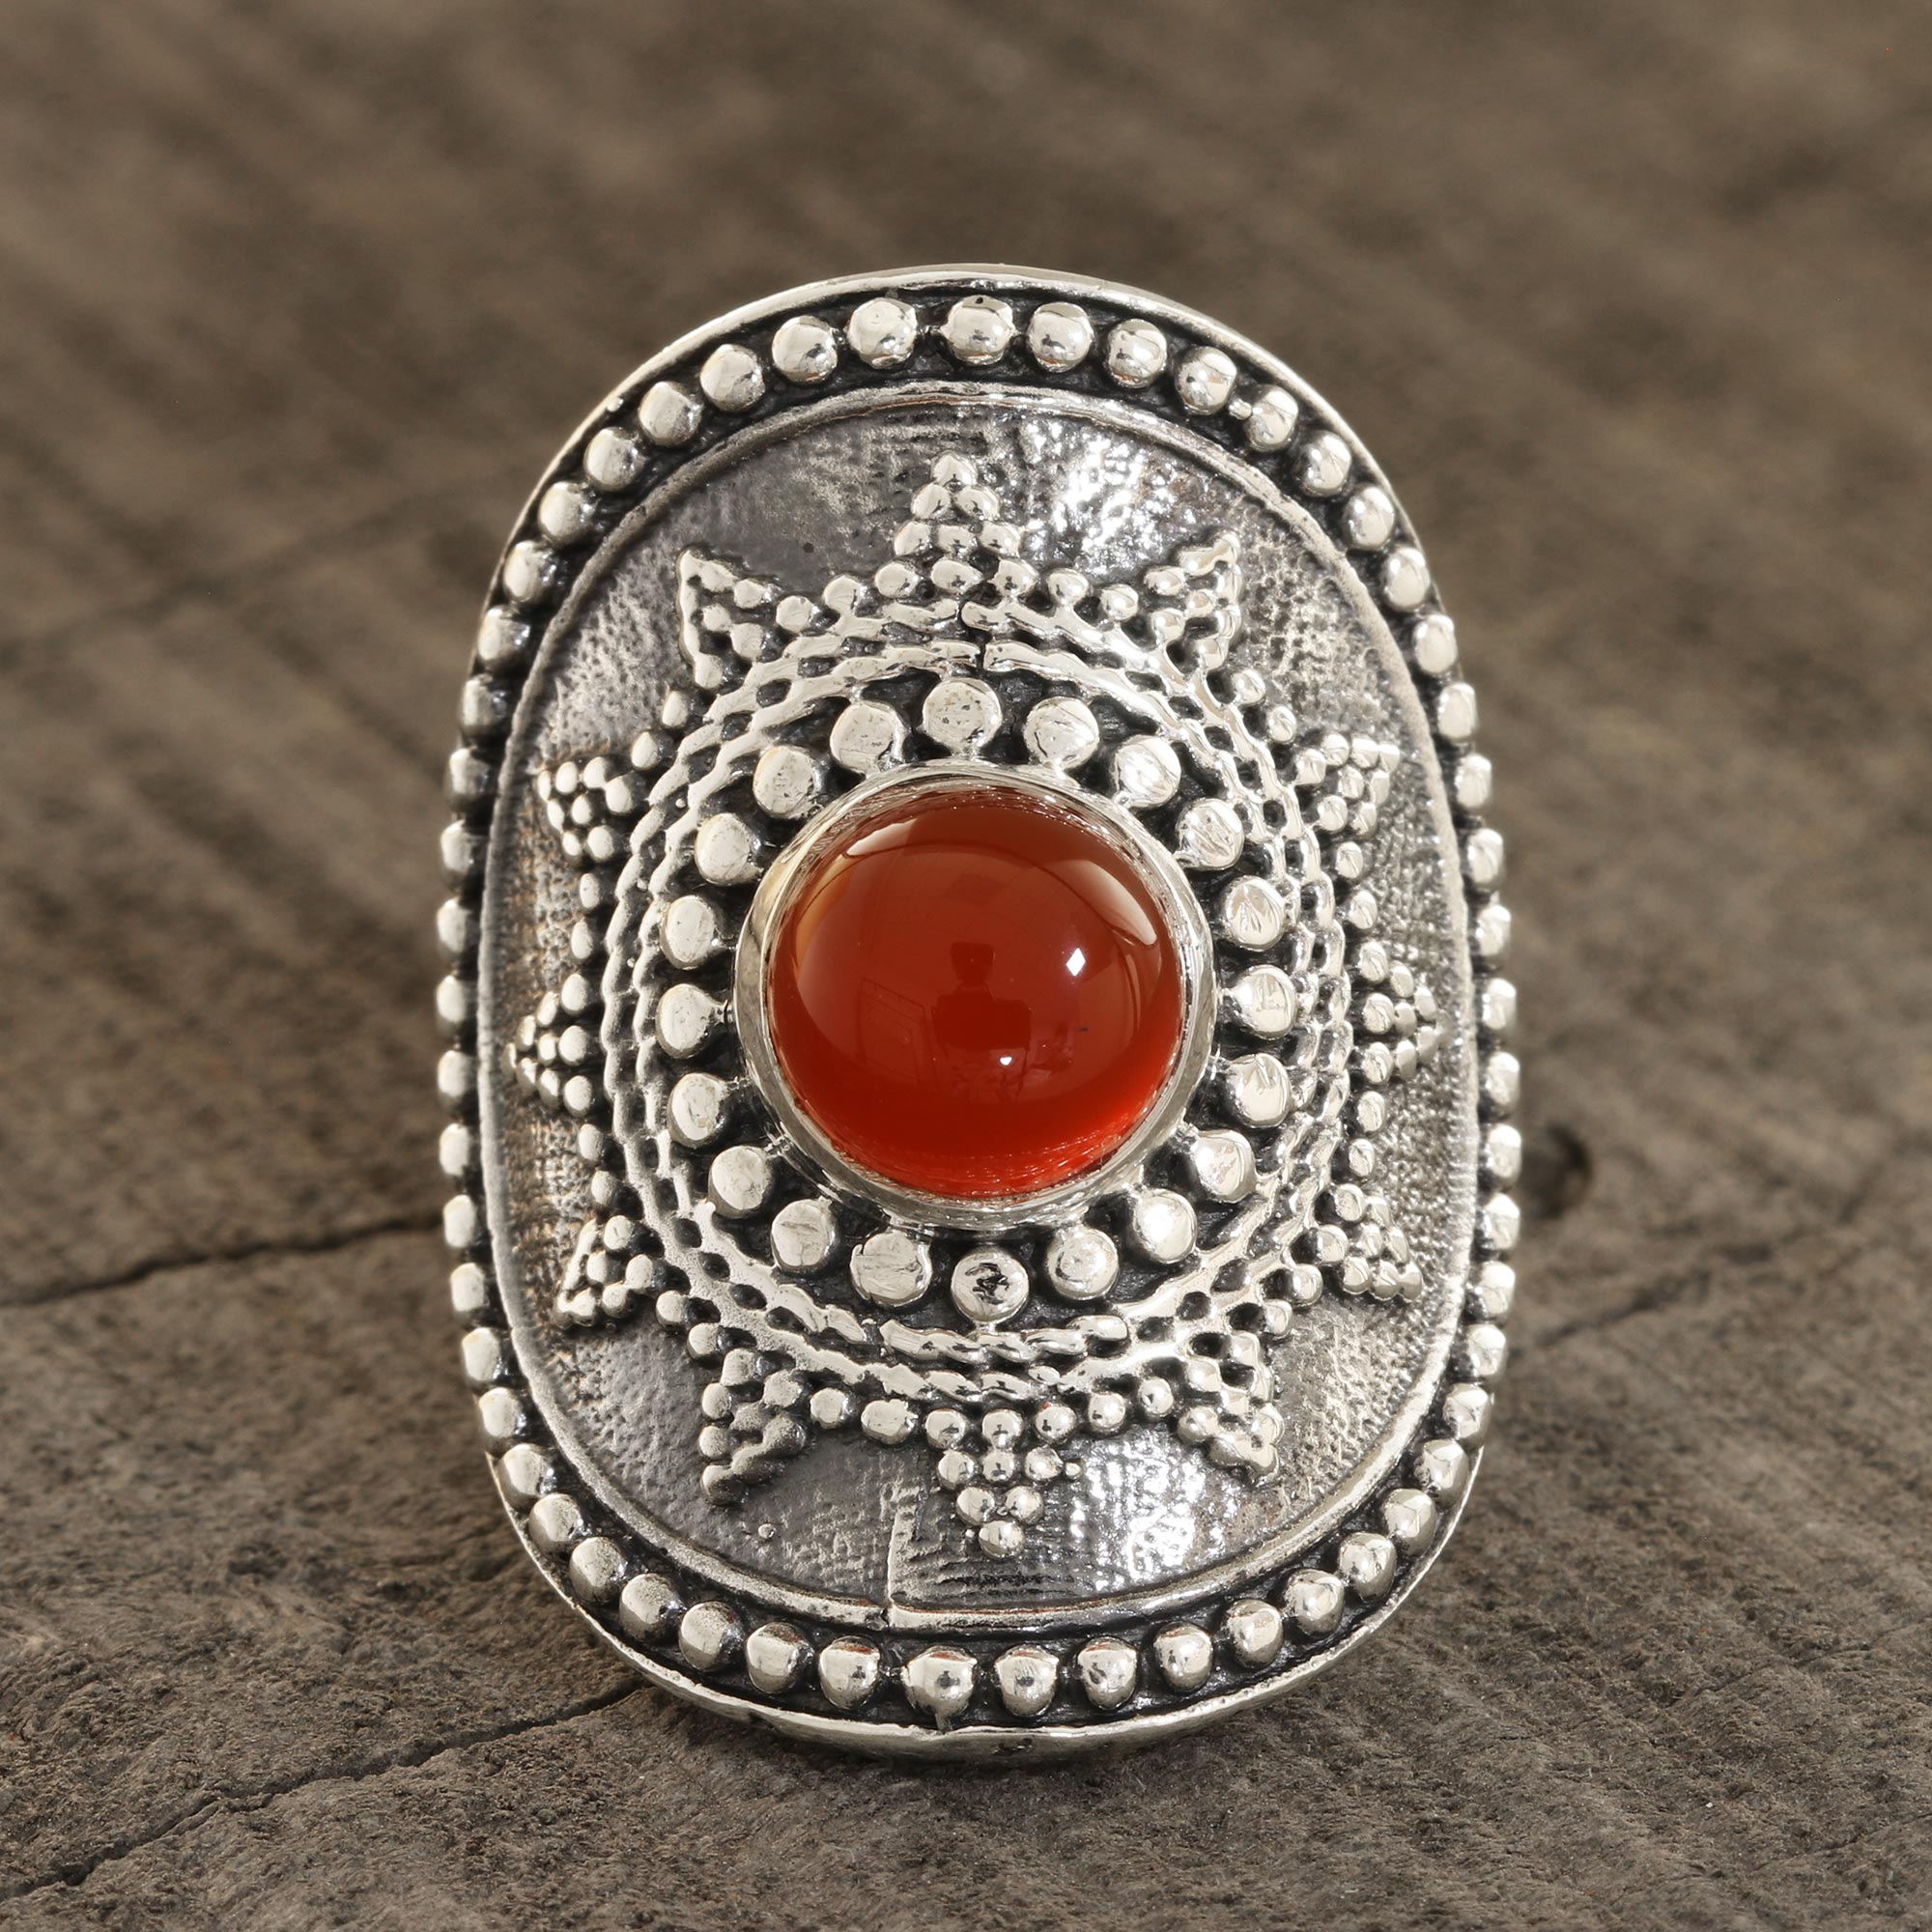 Silver Rings Carnelian rope edge flower three circles oval 925 sterling silver jewelry rings